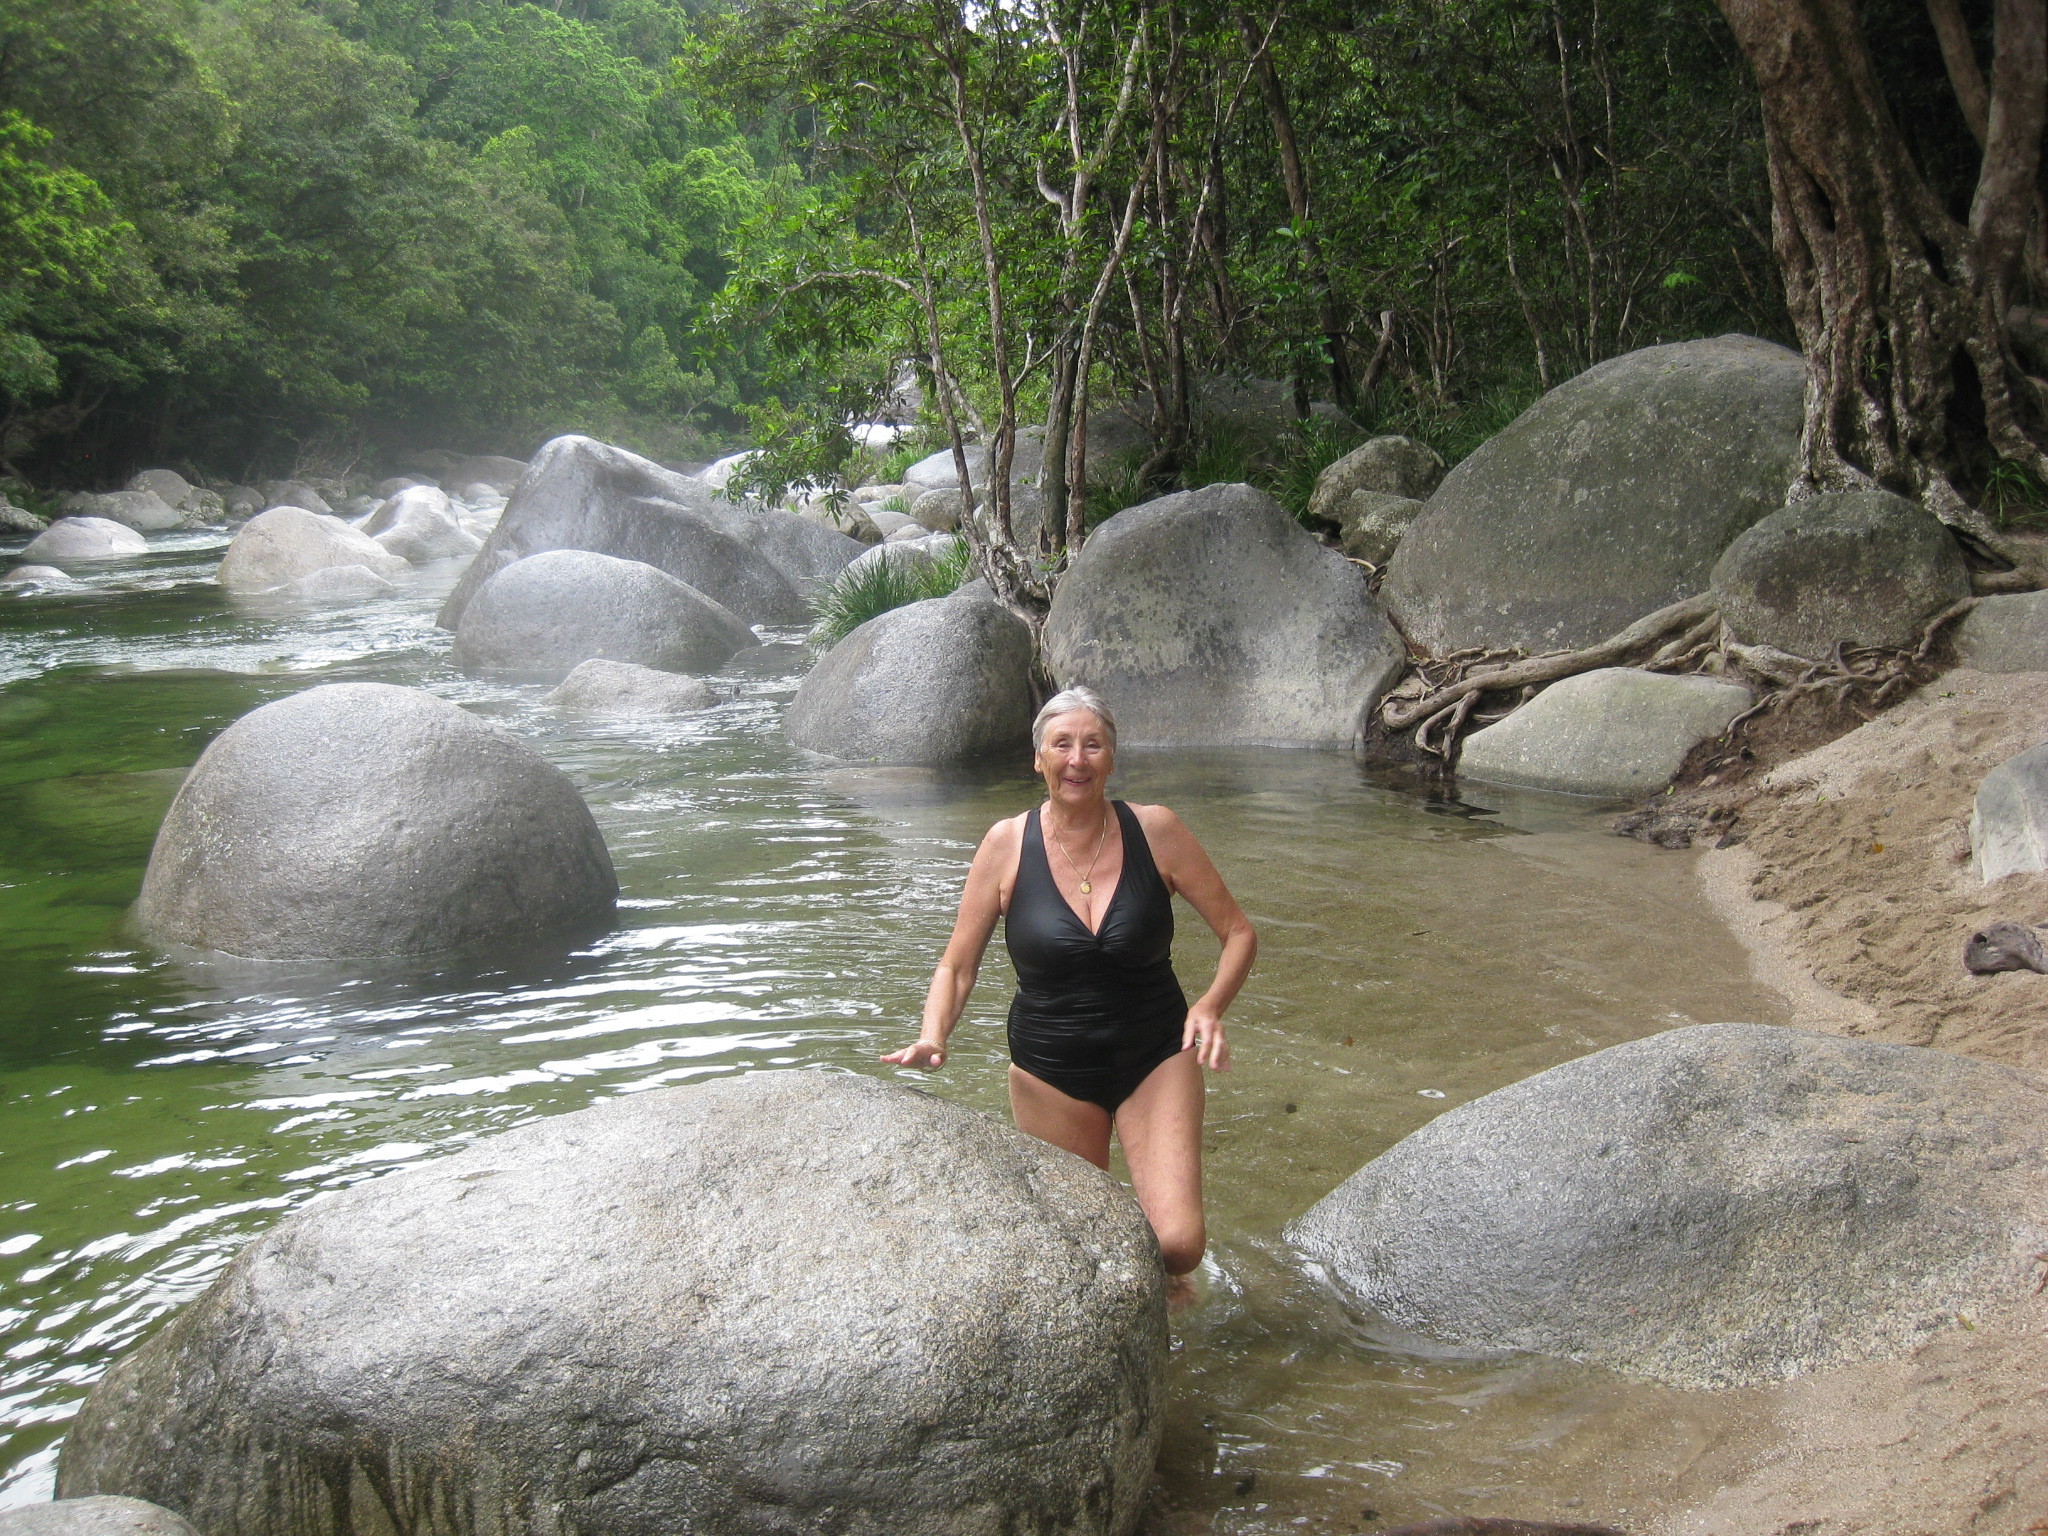 Gerda emerging from the very refreshing river water.